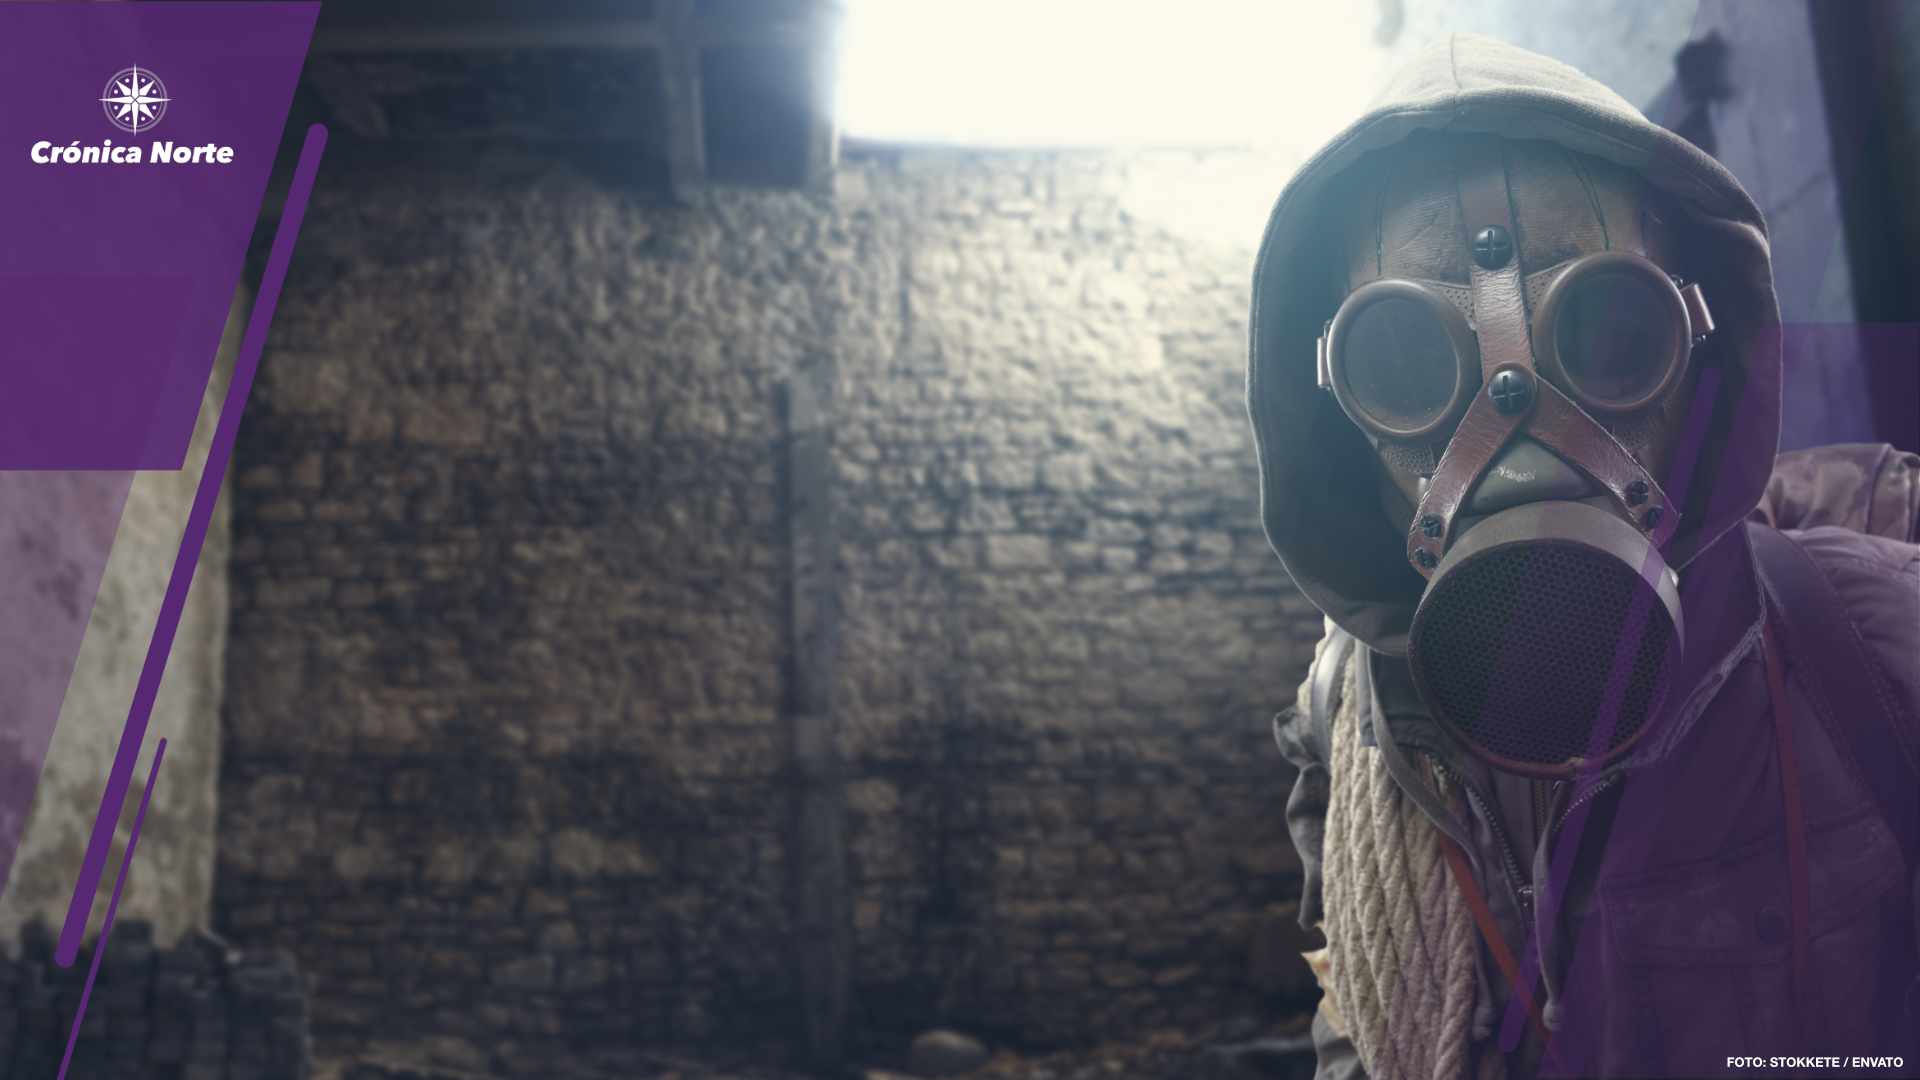 Nuclear disaster survivor in a post apocalyptic setting, he is wearing a gas mask and walking in a destroyed city